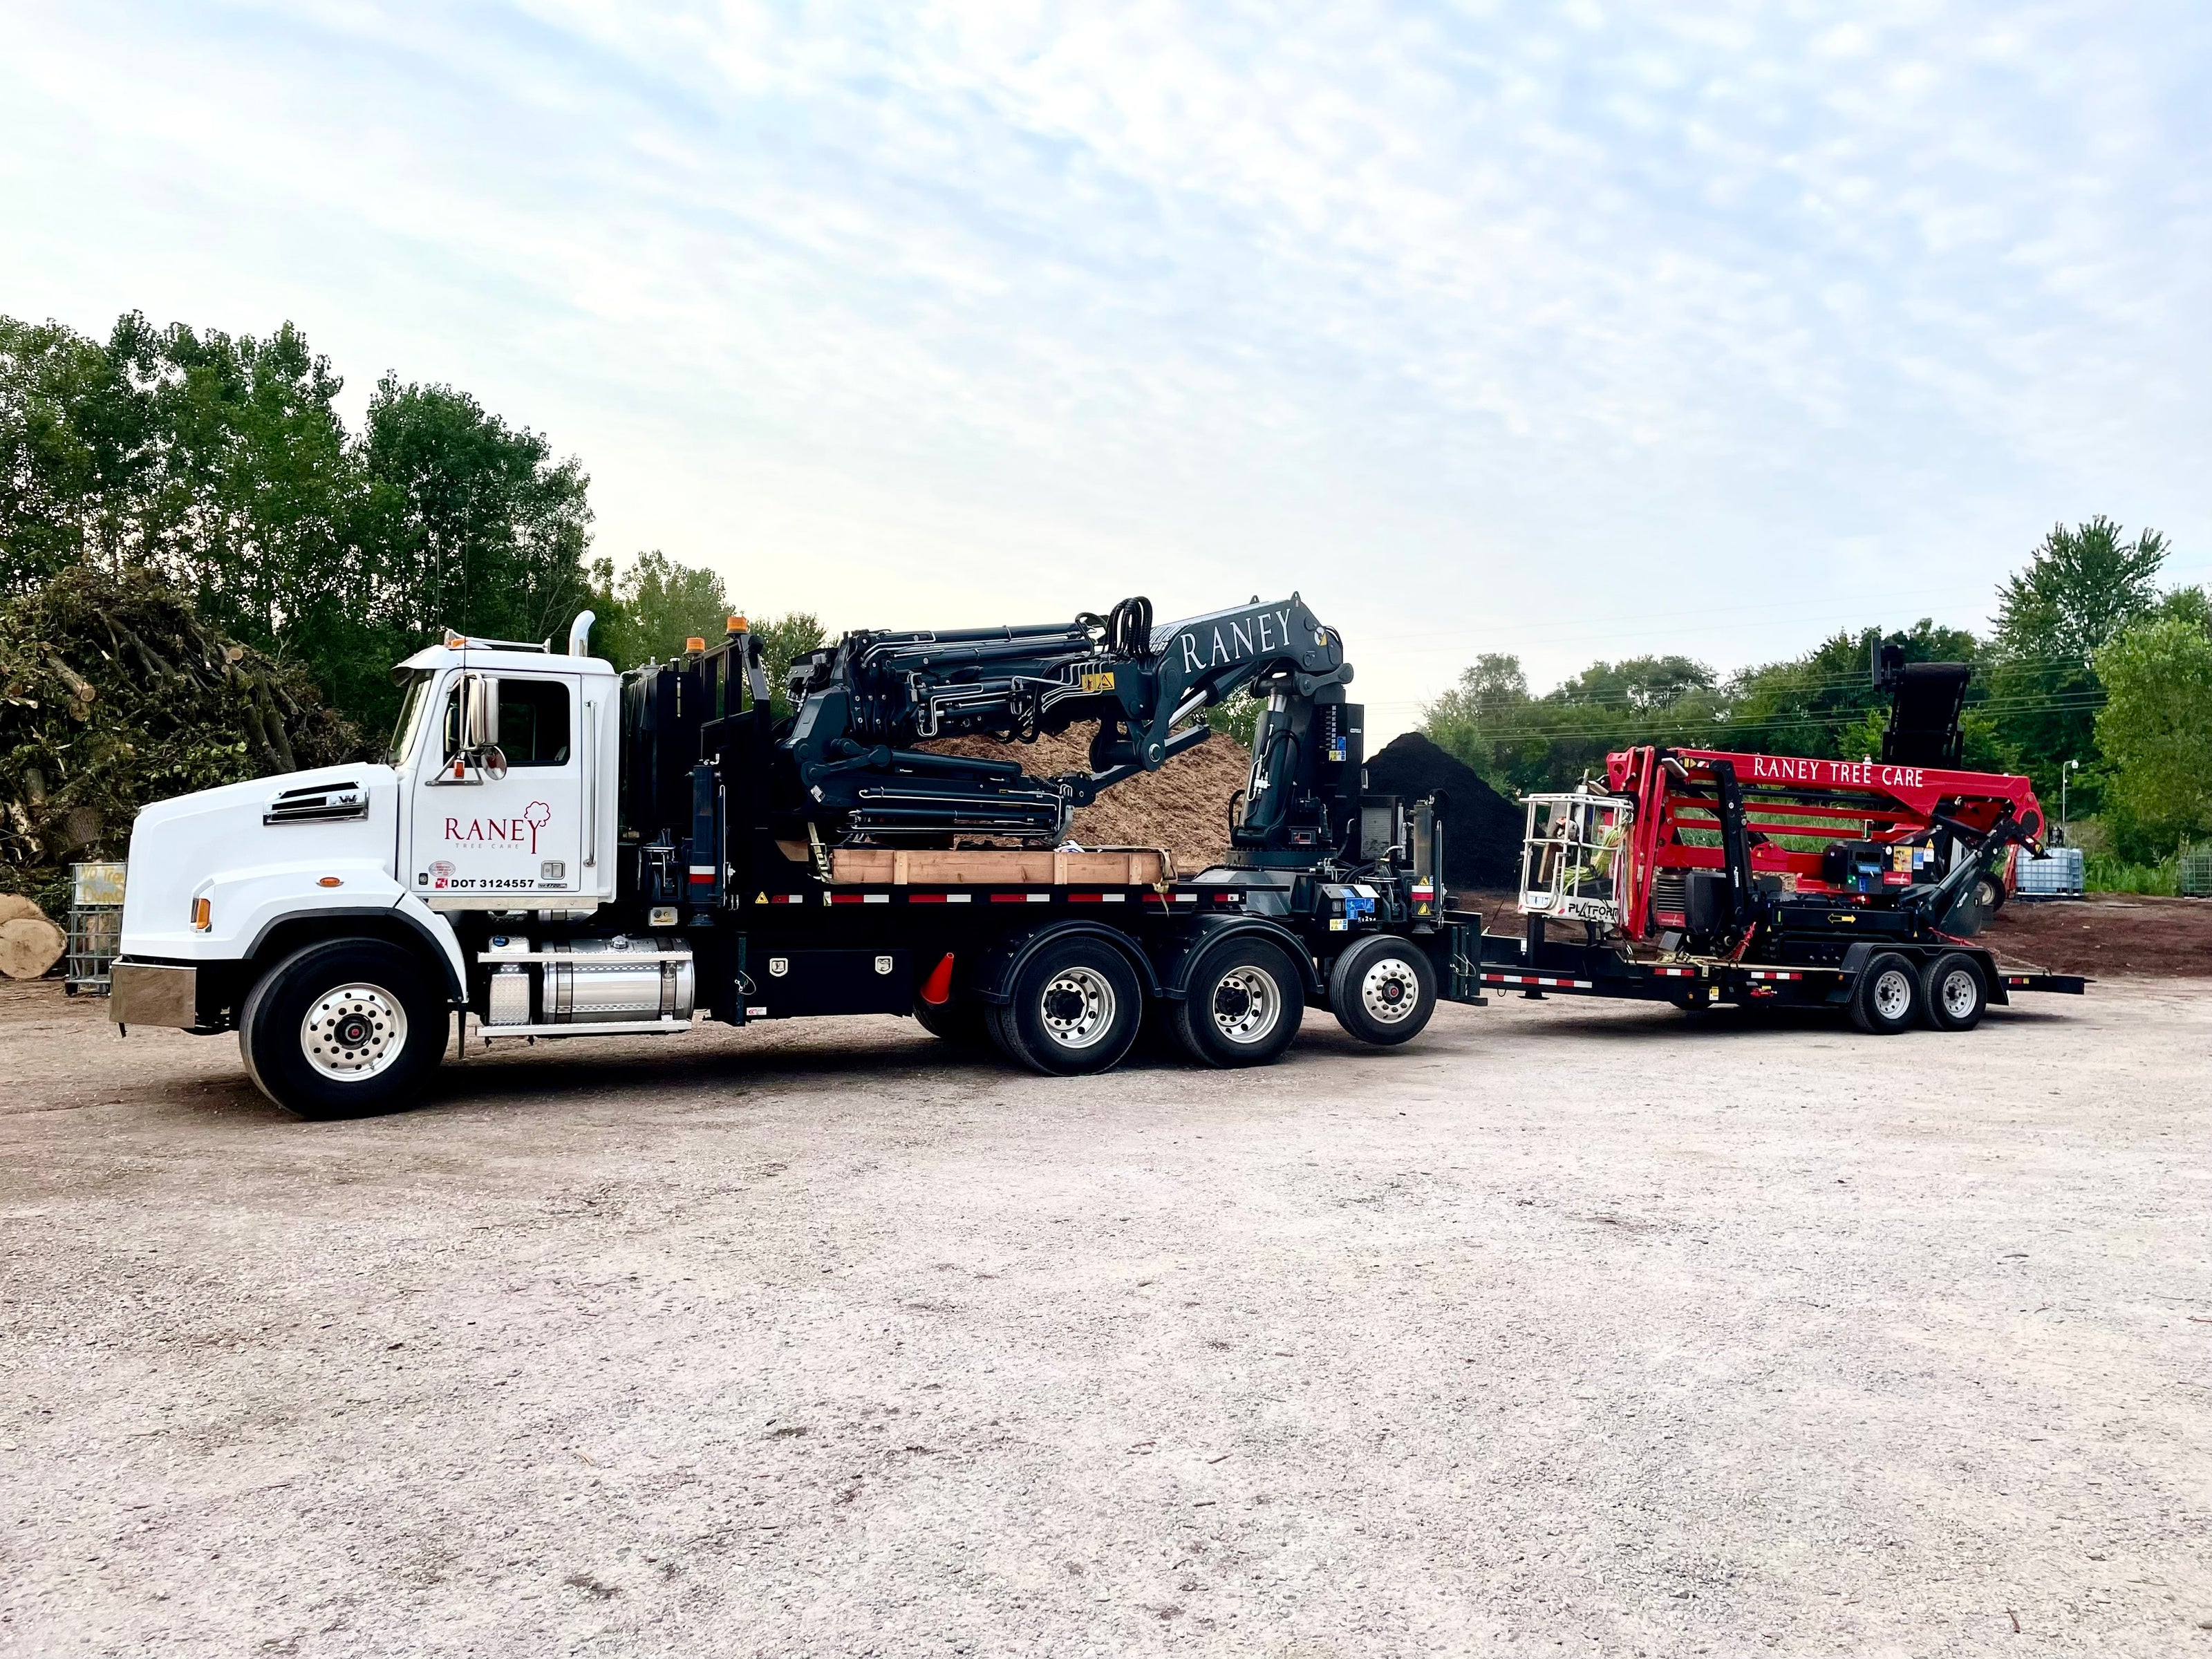 Raney Tree Care Western Star with Copma Crane and Red Track Lift Trailer